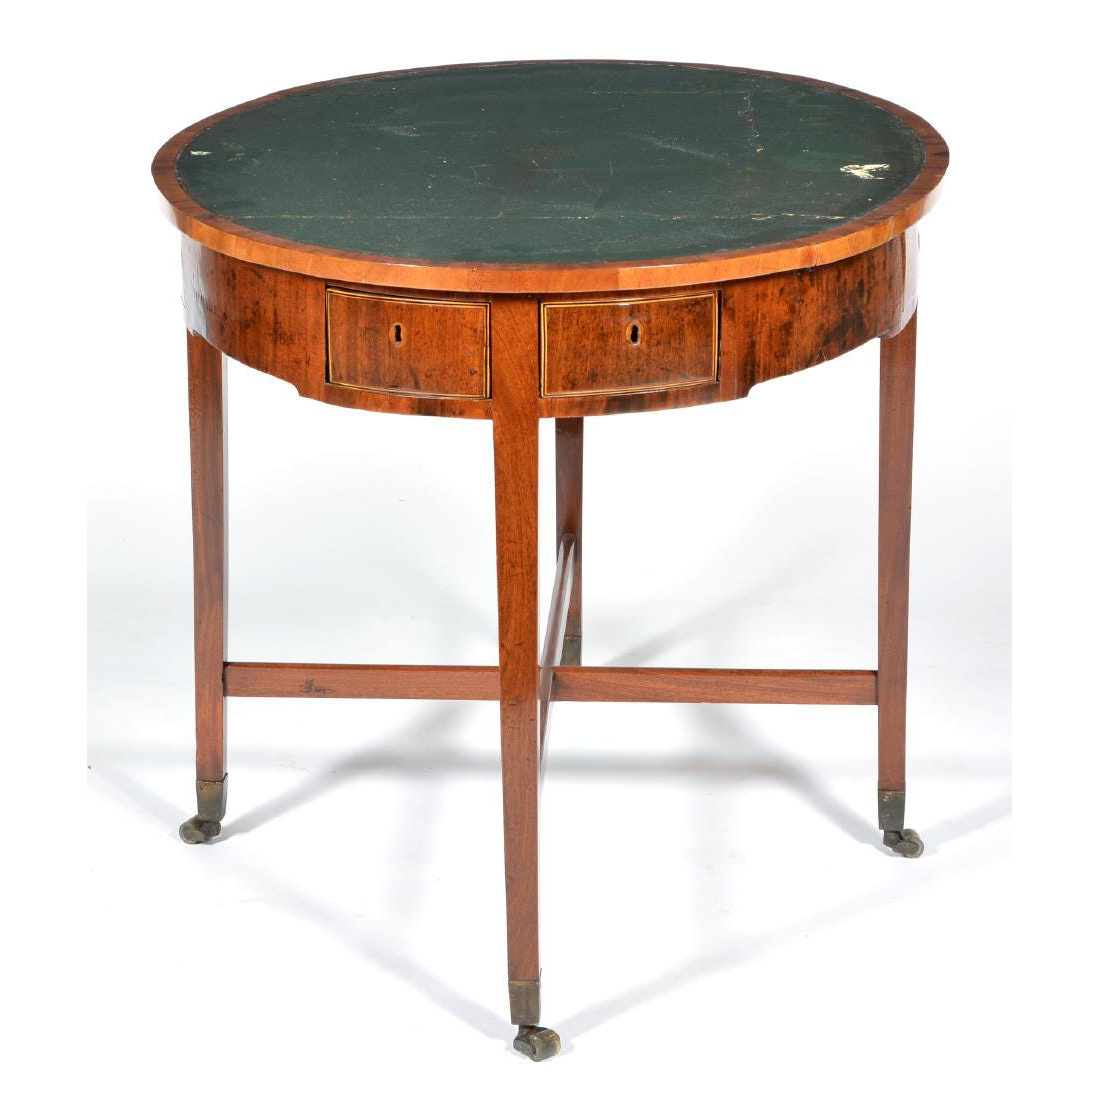 AF1-153: ANTIQUE EARLY 19TH CENTURY ENGLISH MAHOGANY LEATHER TOP RENT OR GAME TABLE